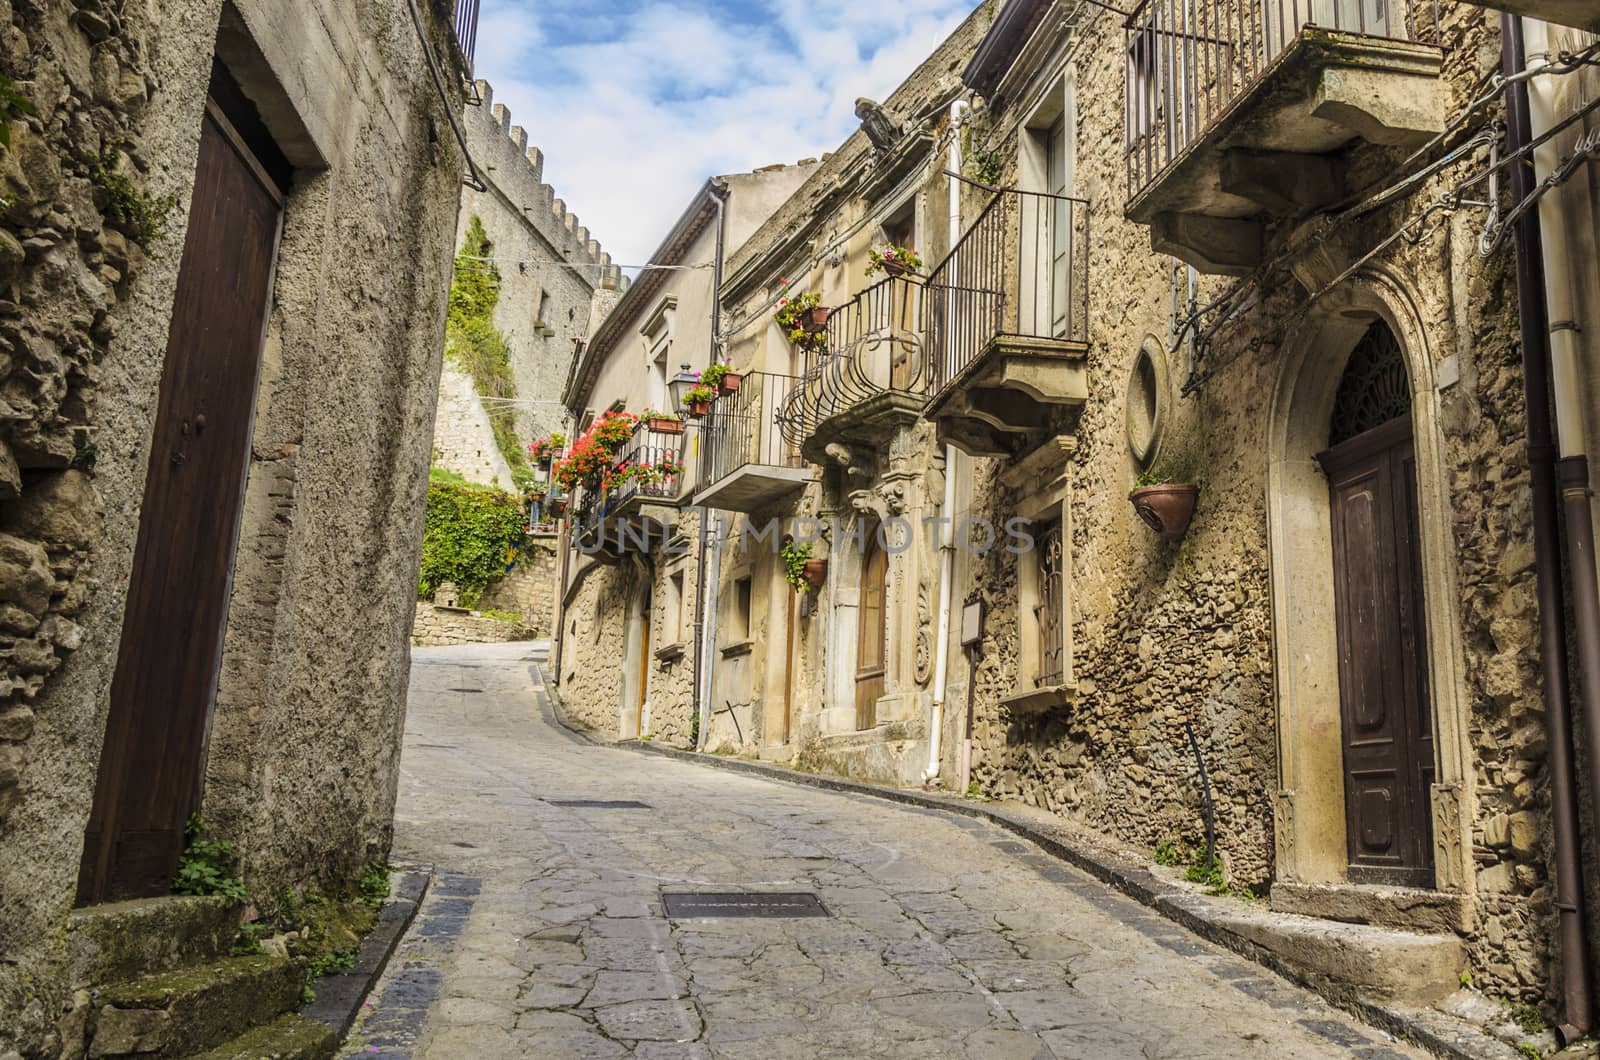 Away from the coast to the height of the coastal town Cefalú lies between mountains the old village Montalvano Elicona and from which we can see its streets so characteristic